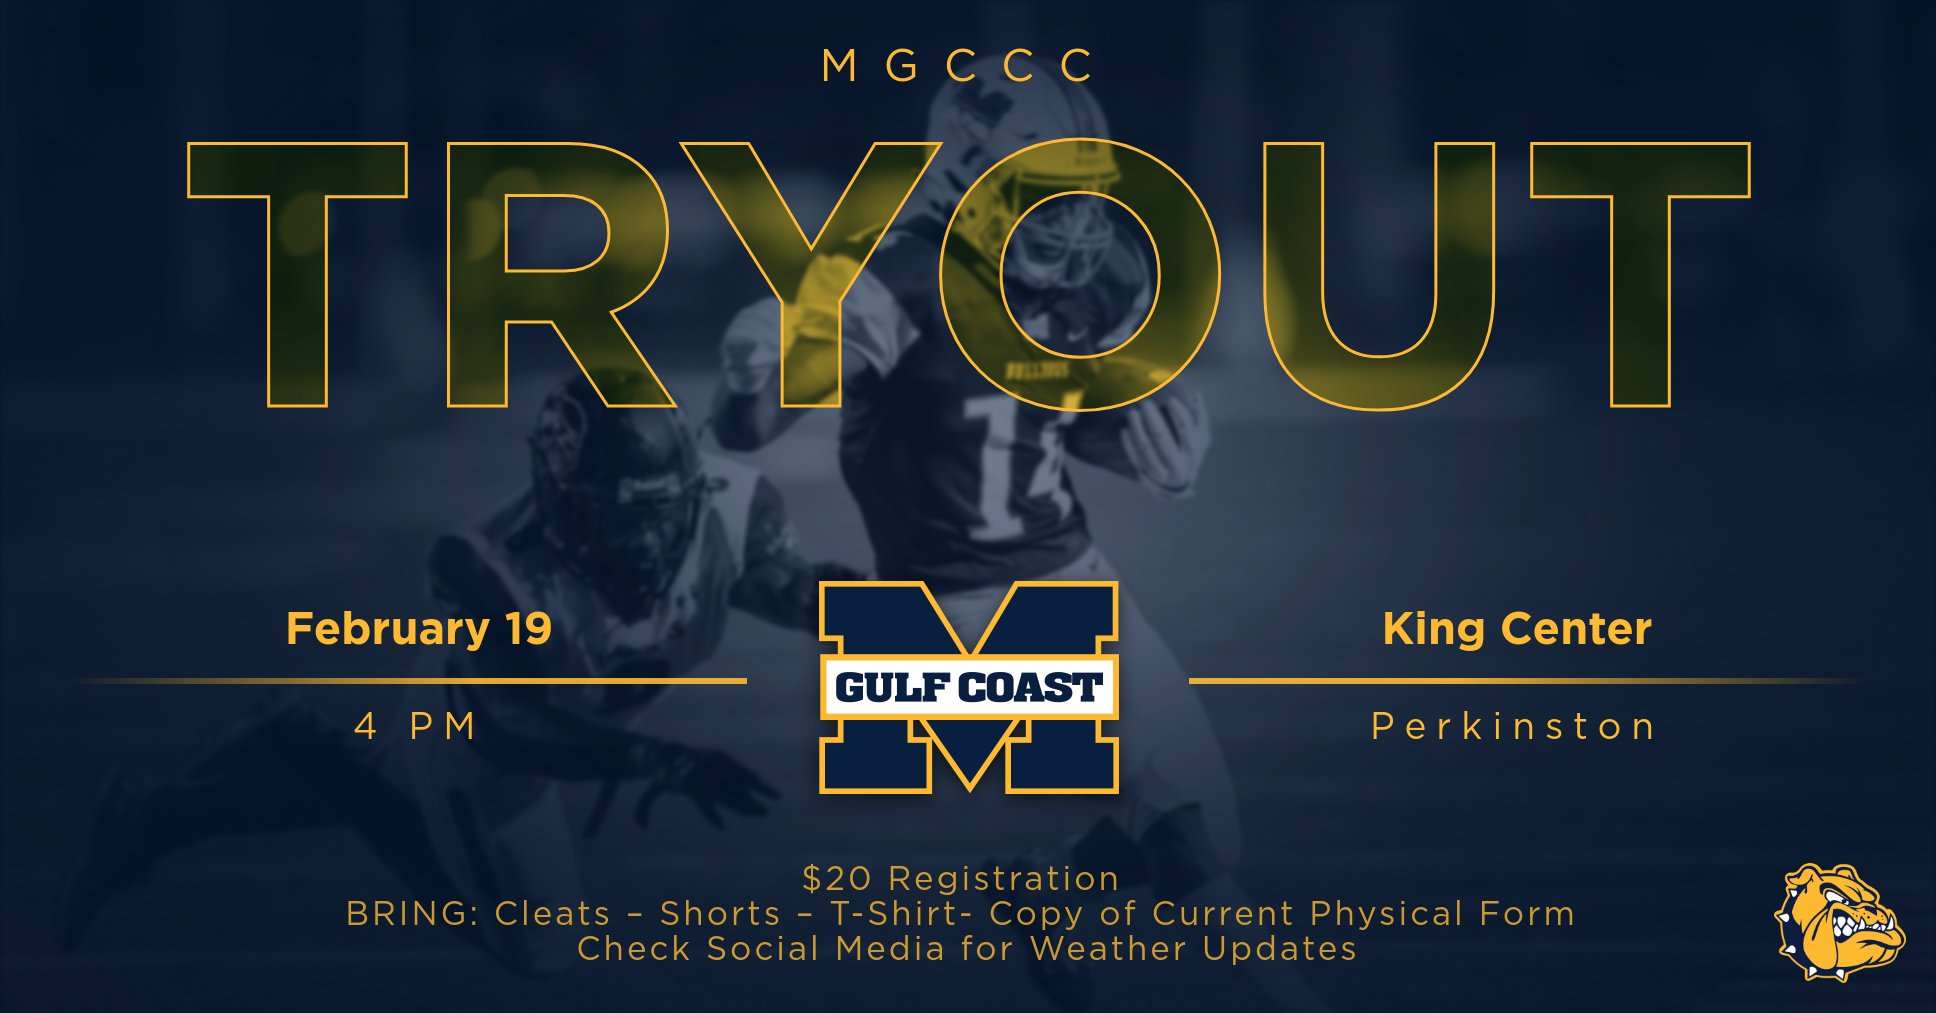 MGCCC Football has tryout on Feb. 19